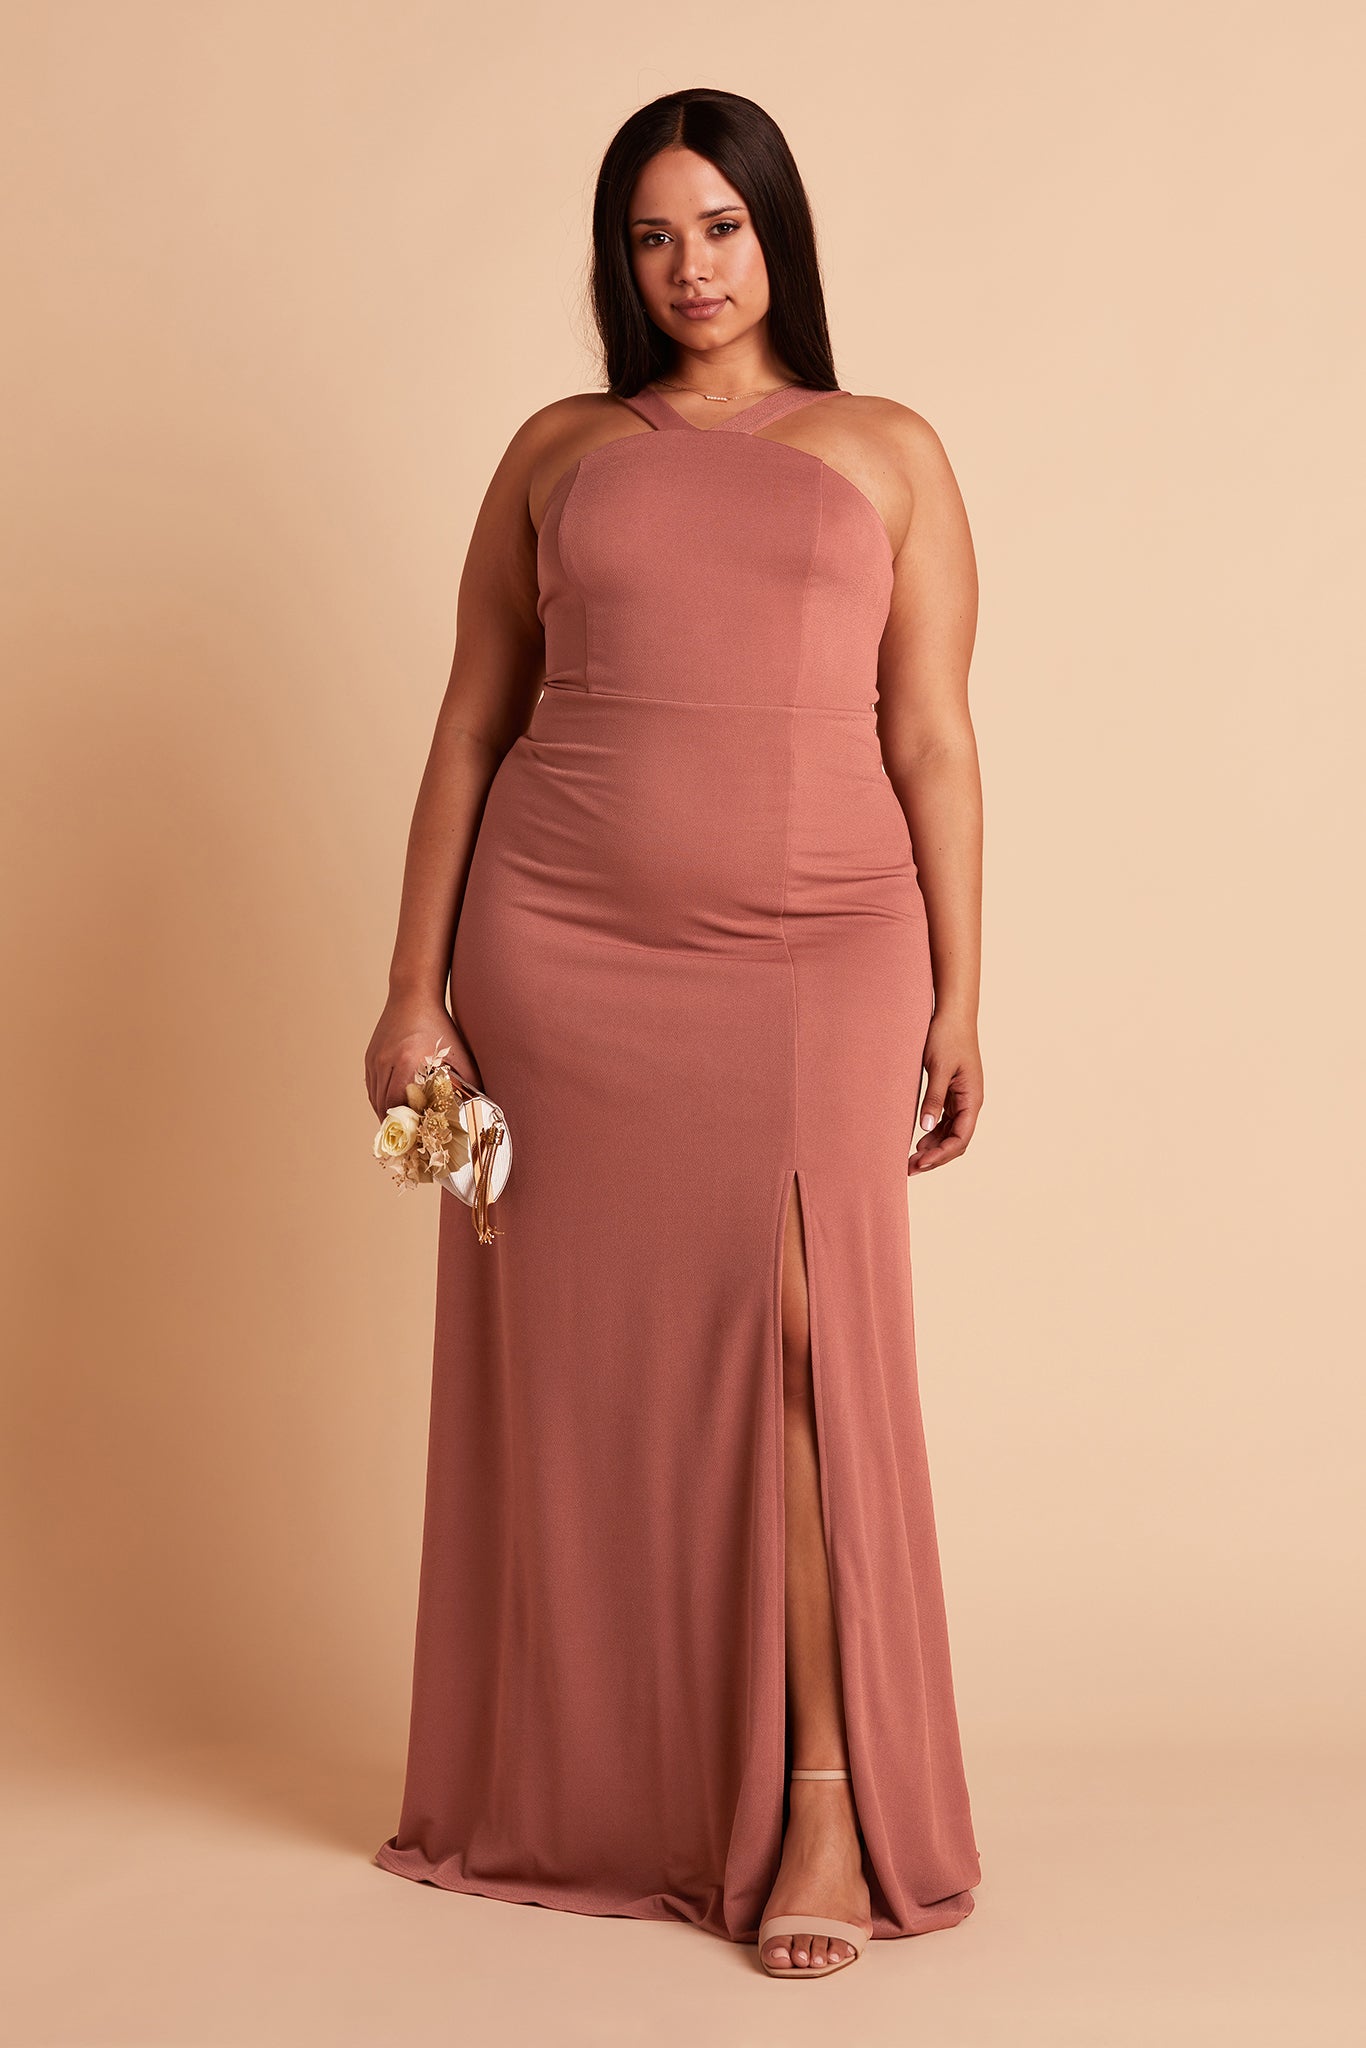 Gene plus size bridesmaid dress with slit in desert rose crepe by Birdy Grey, front view